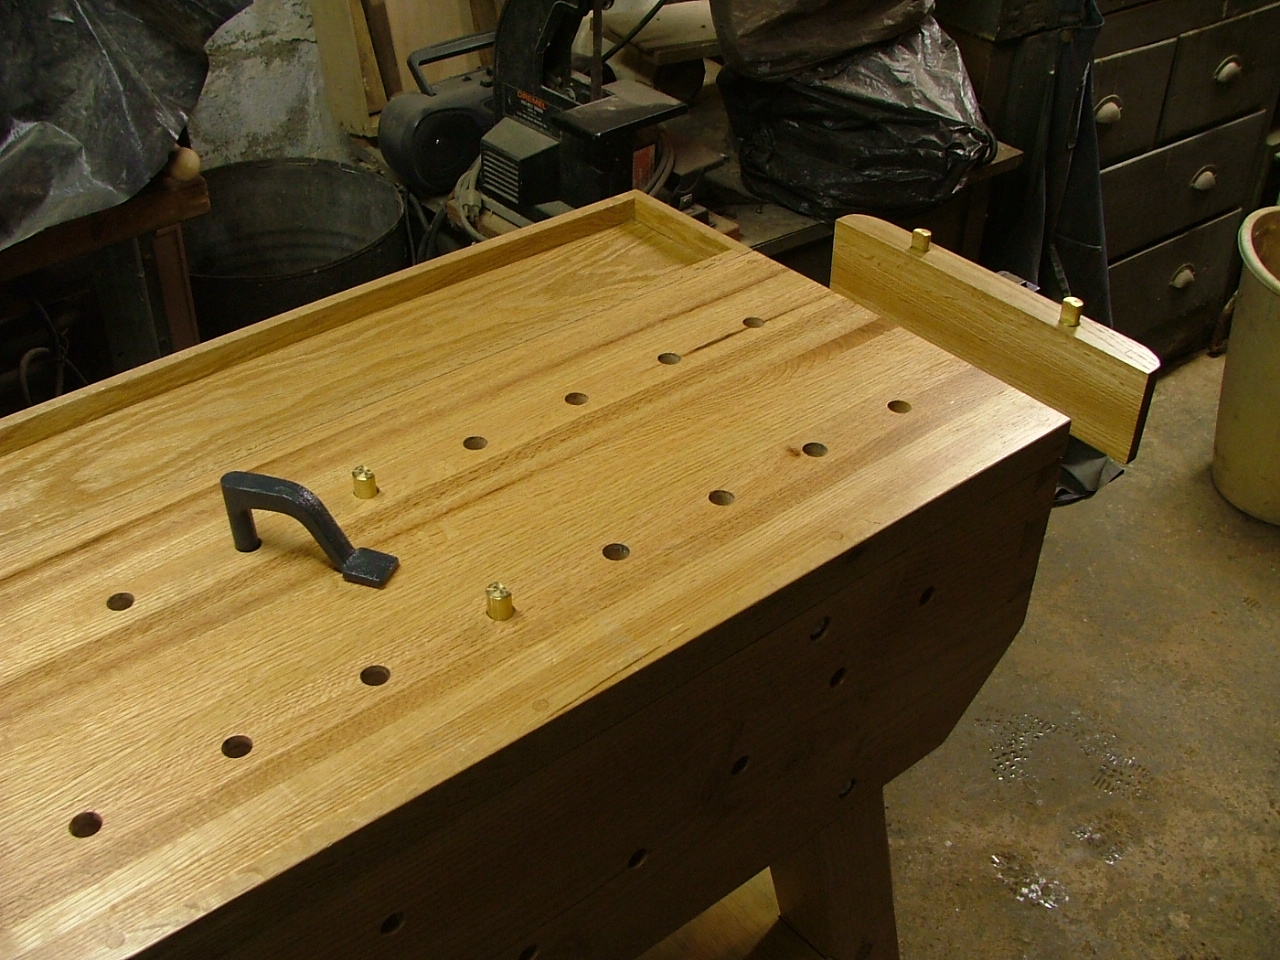 Woodworking table dogs Main Image